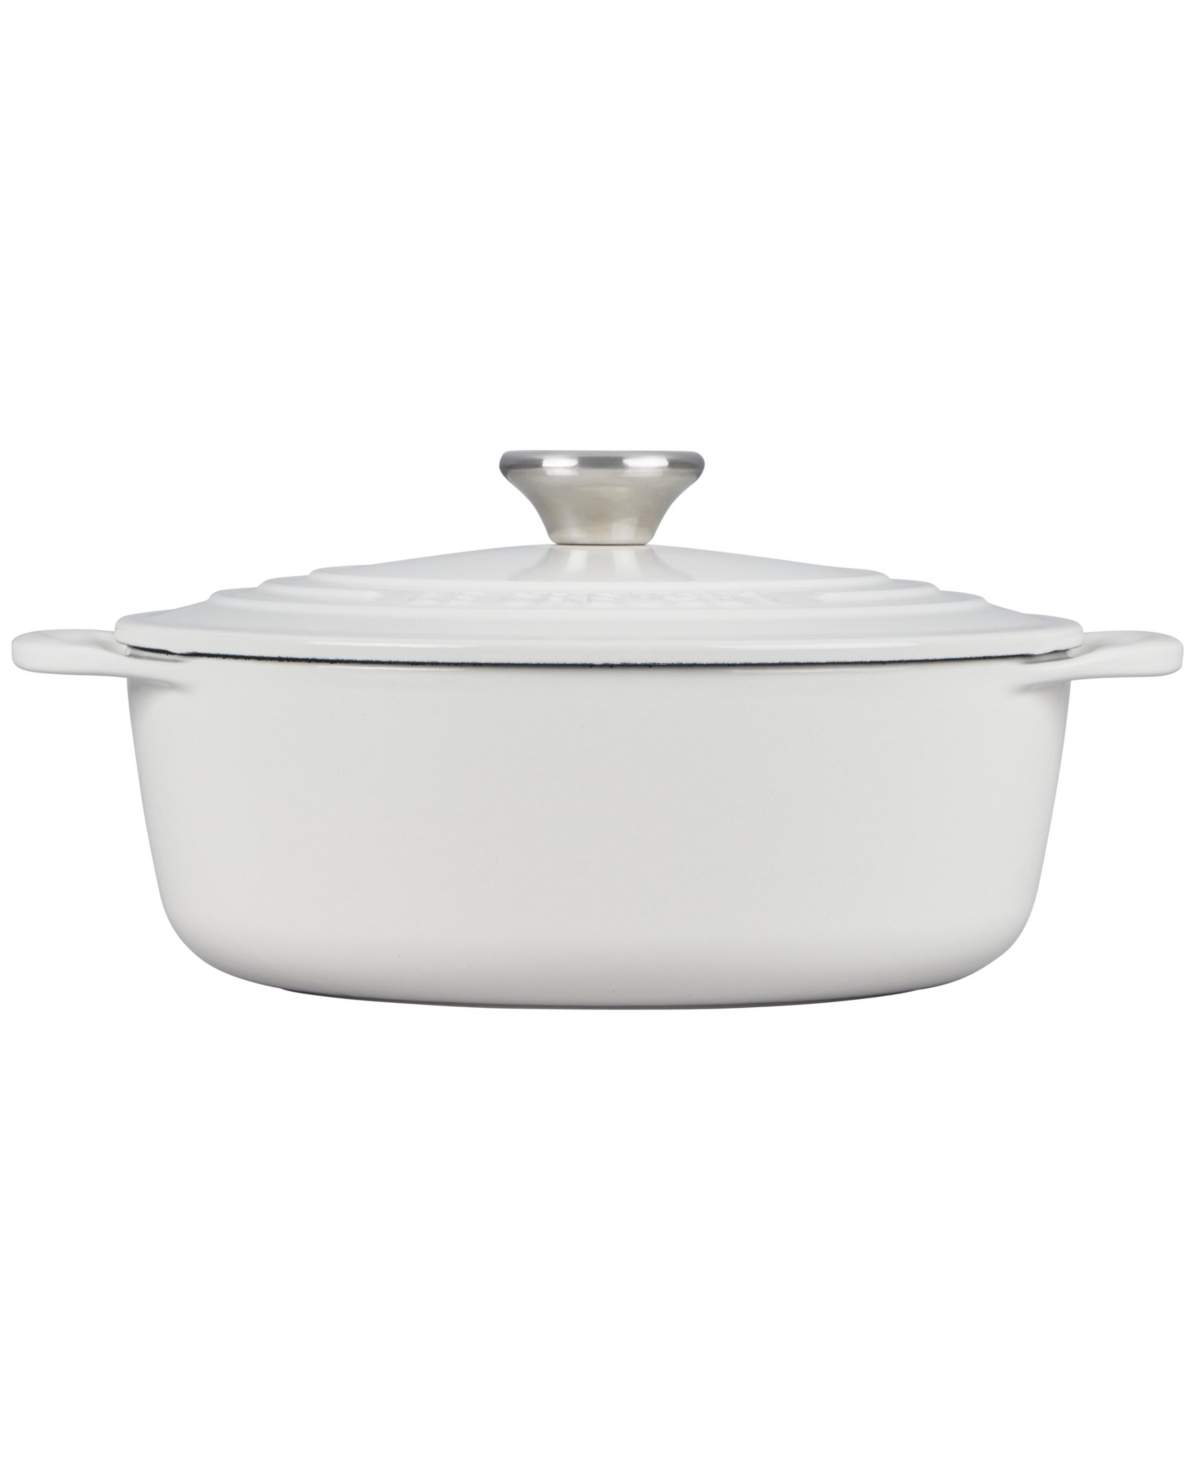 Le Creuset 2.75-qt. Enameled Cast Iron Shallow Round Dutch Oven In White